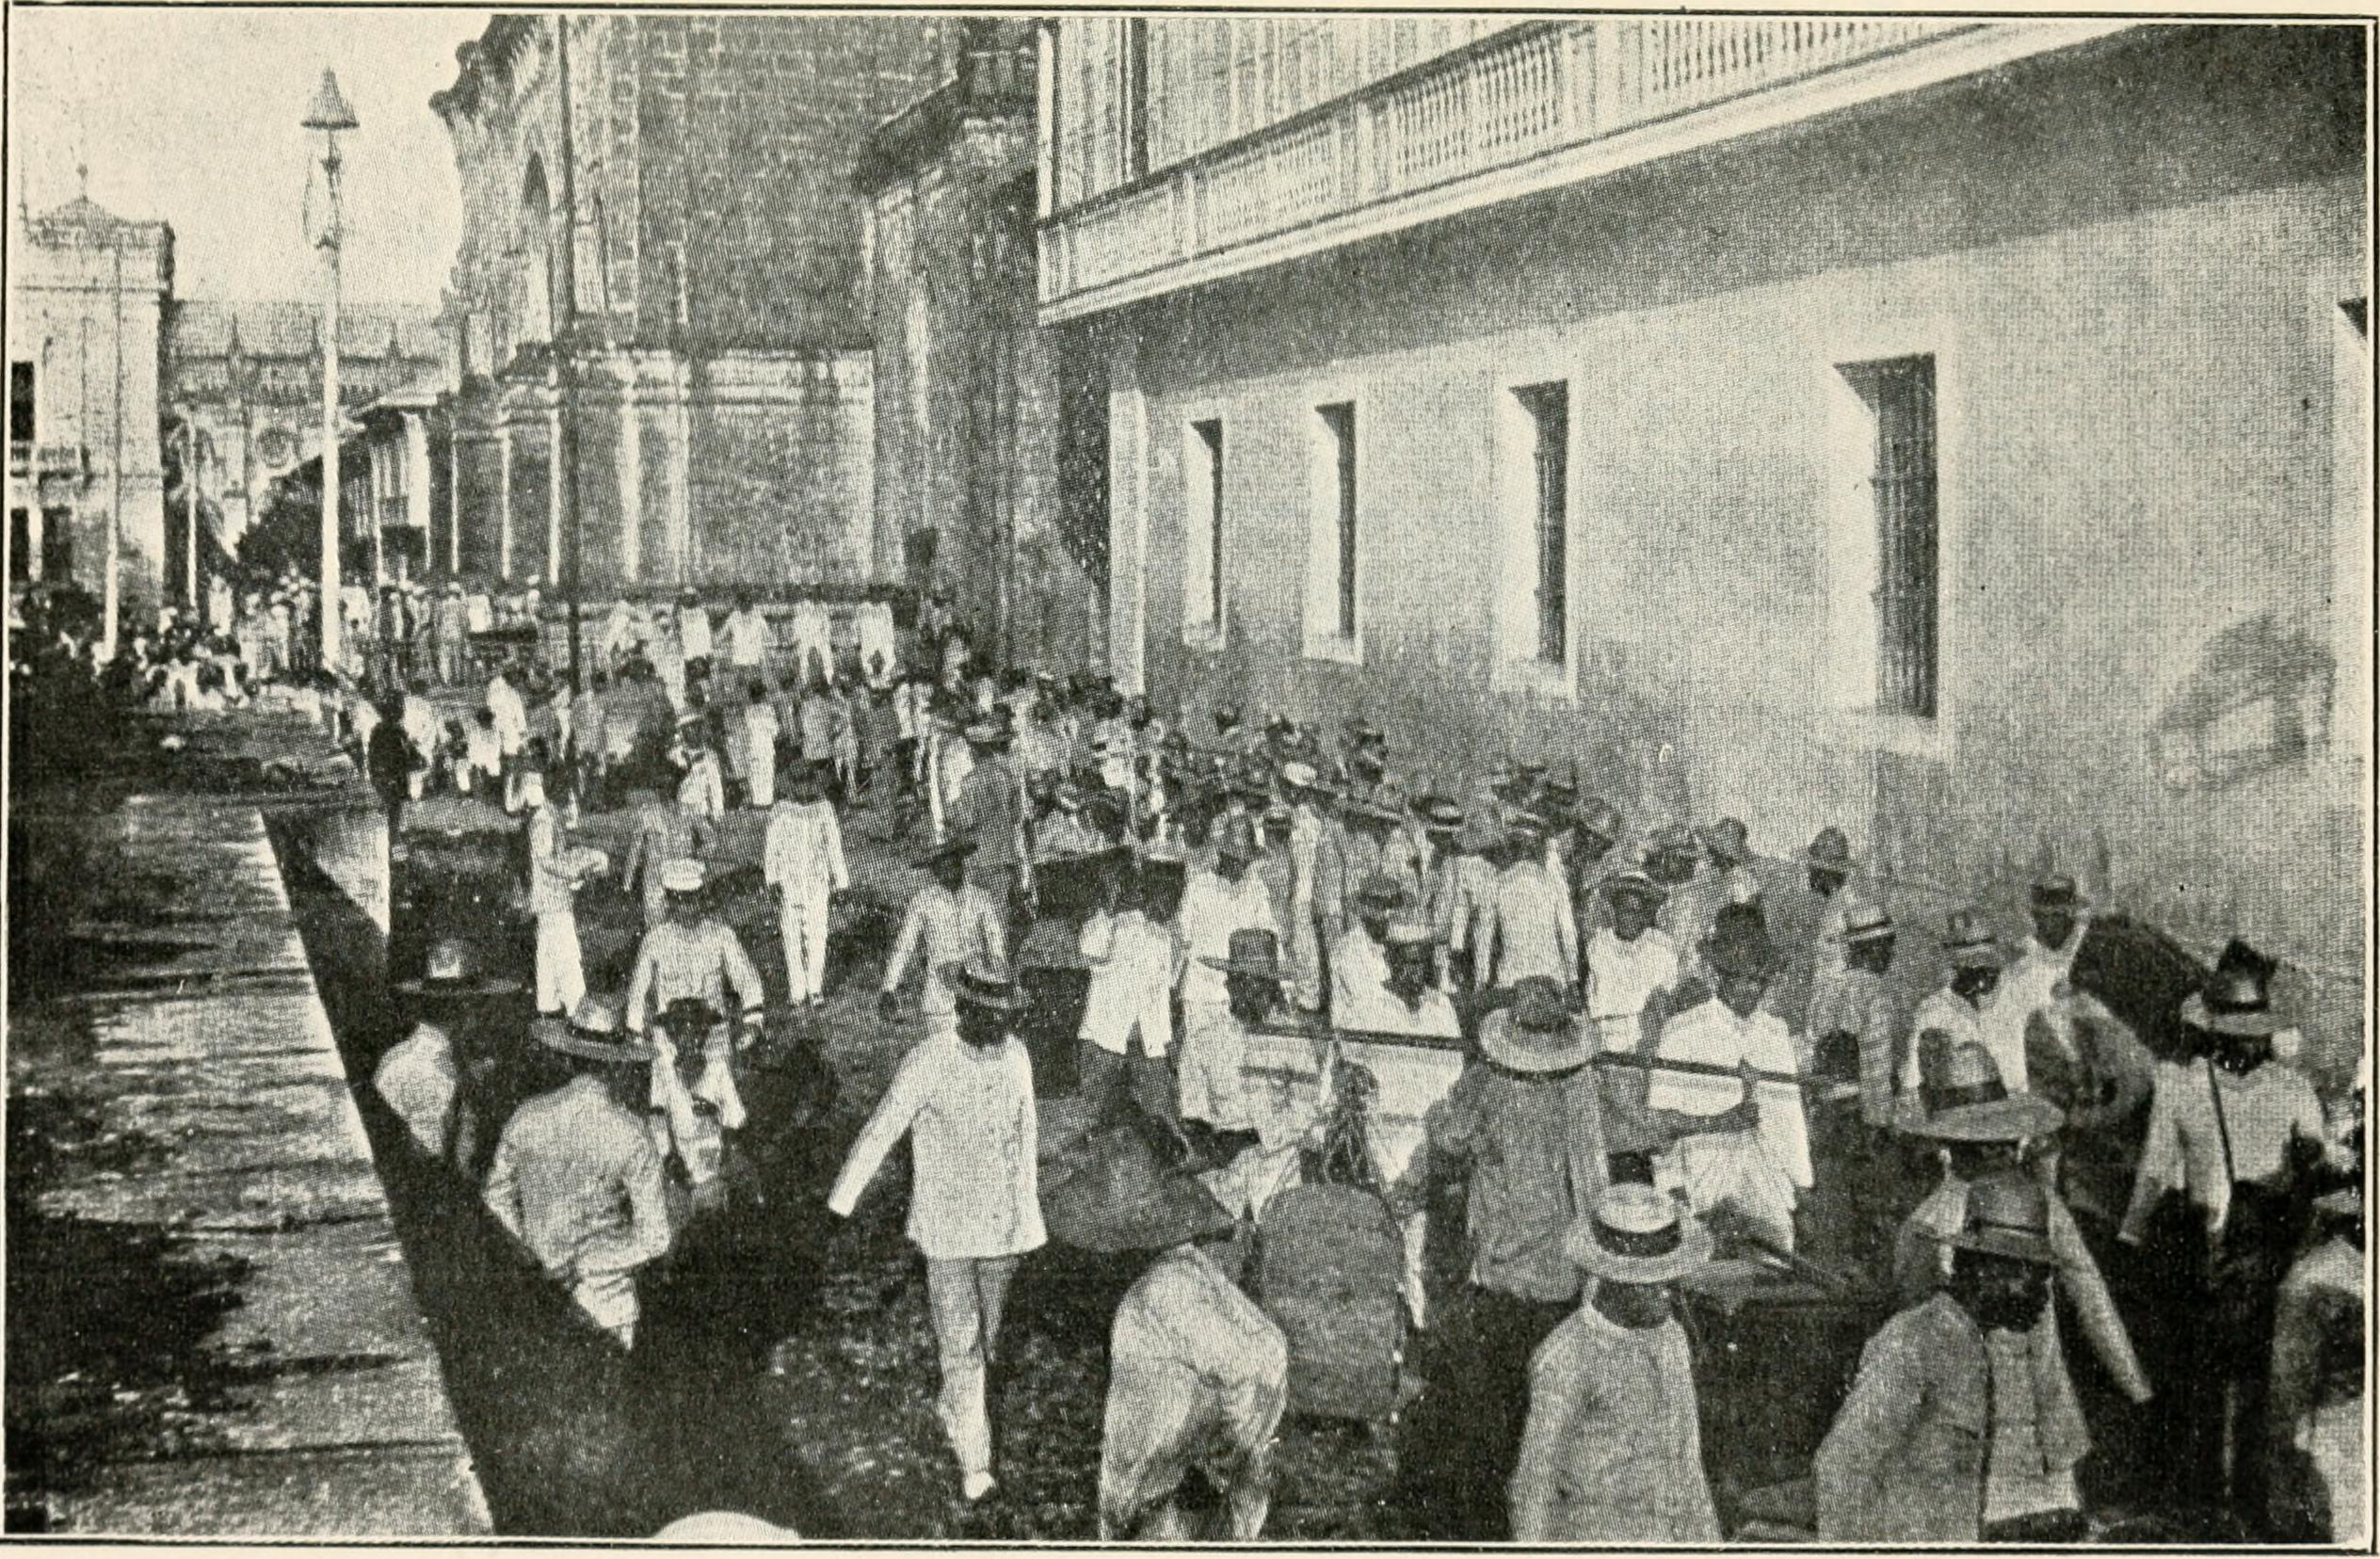 image of workers in the street from 'A Story From the Philippines (1902)'